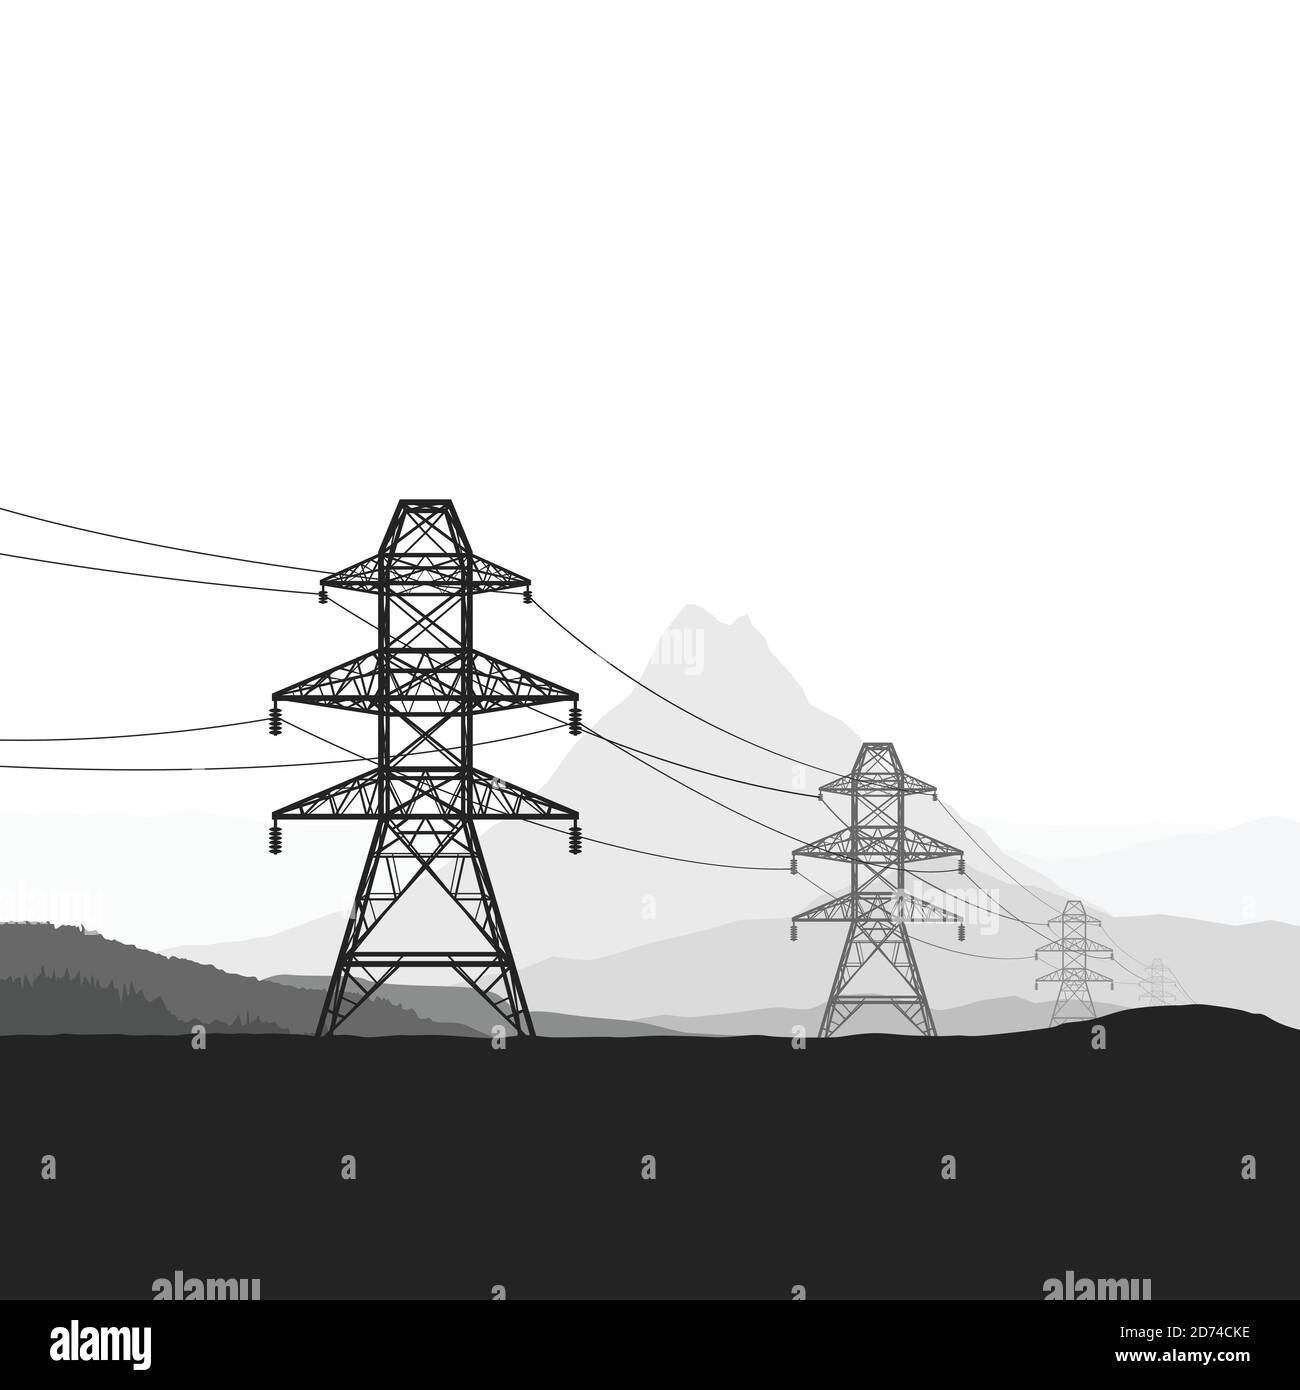 image of electric towers in nature silhouette Stock Vector